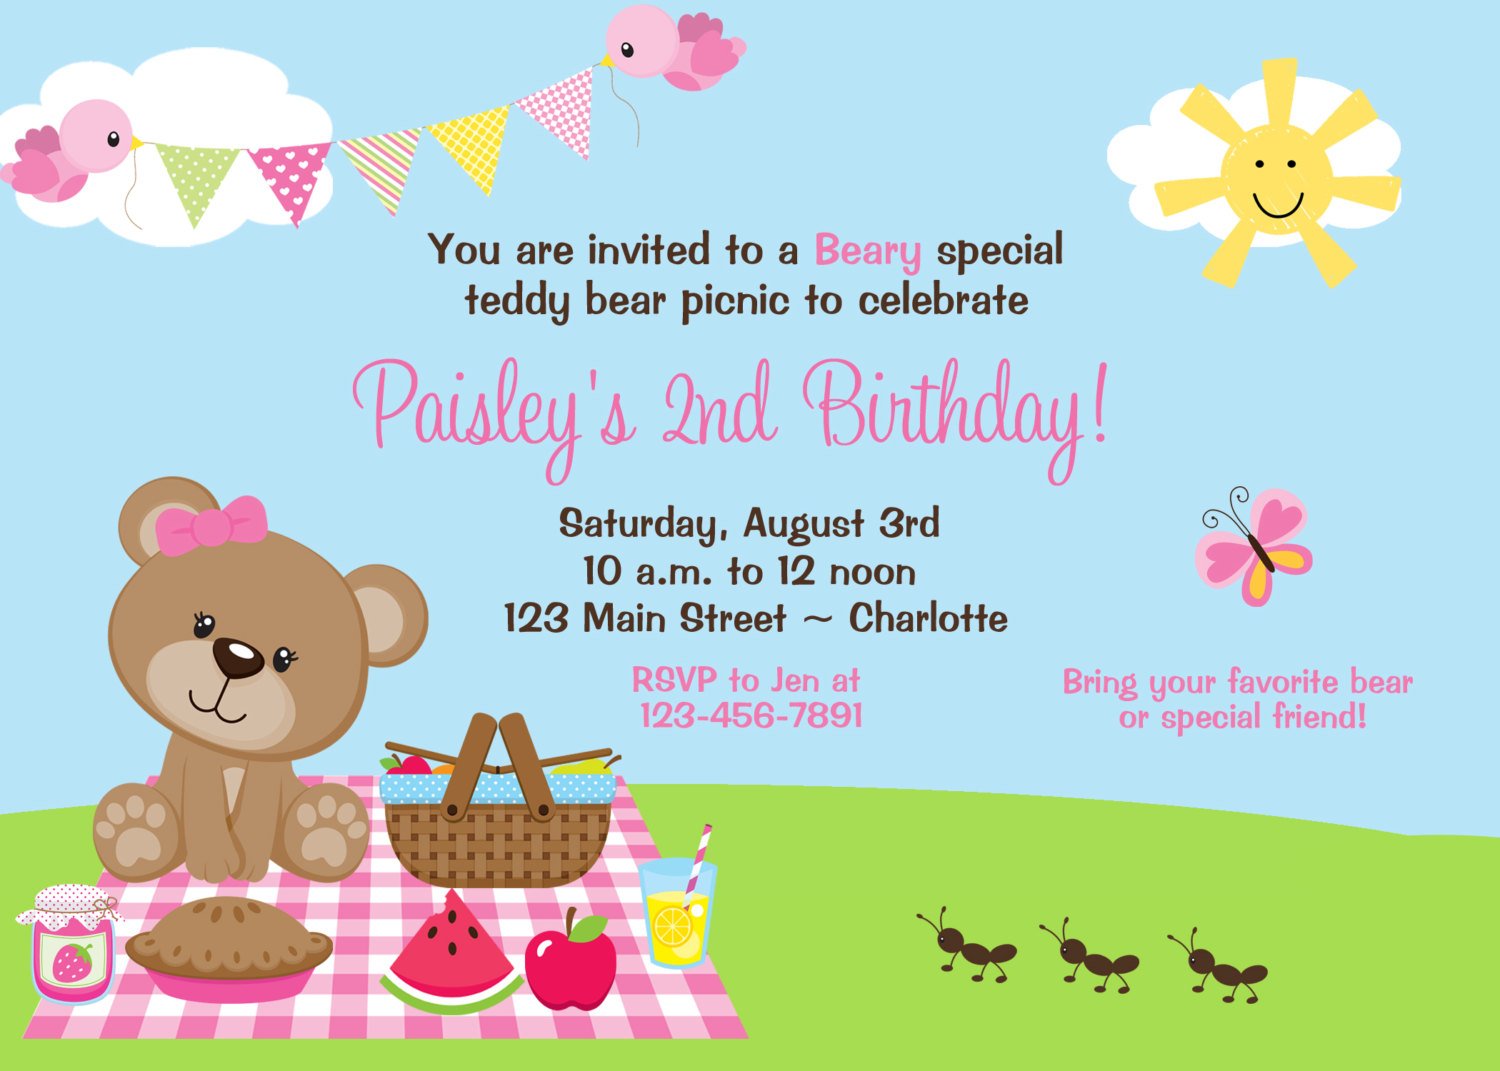 10 Best Images About Teddy Bear Picnic Party Ideas On Pinterest